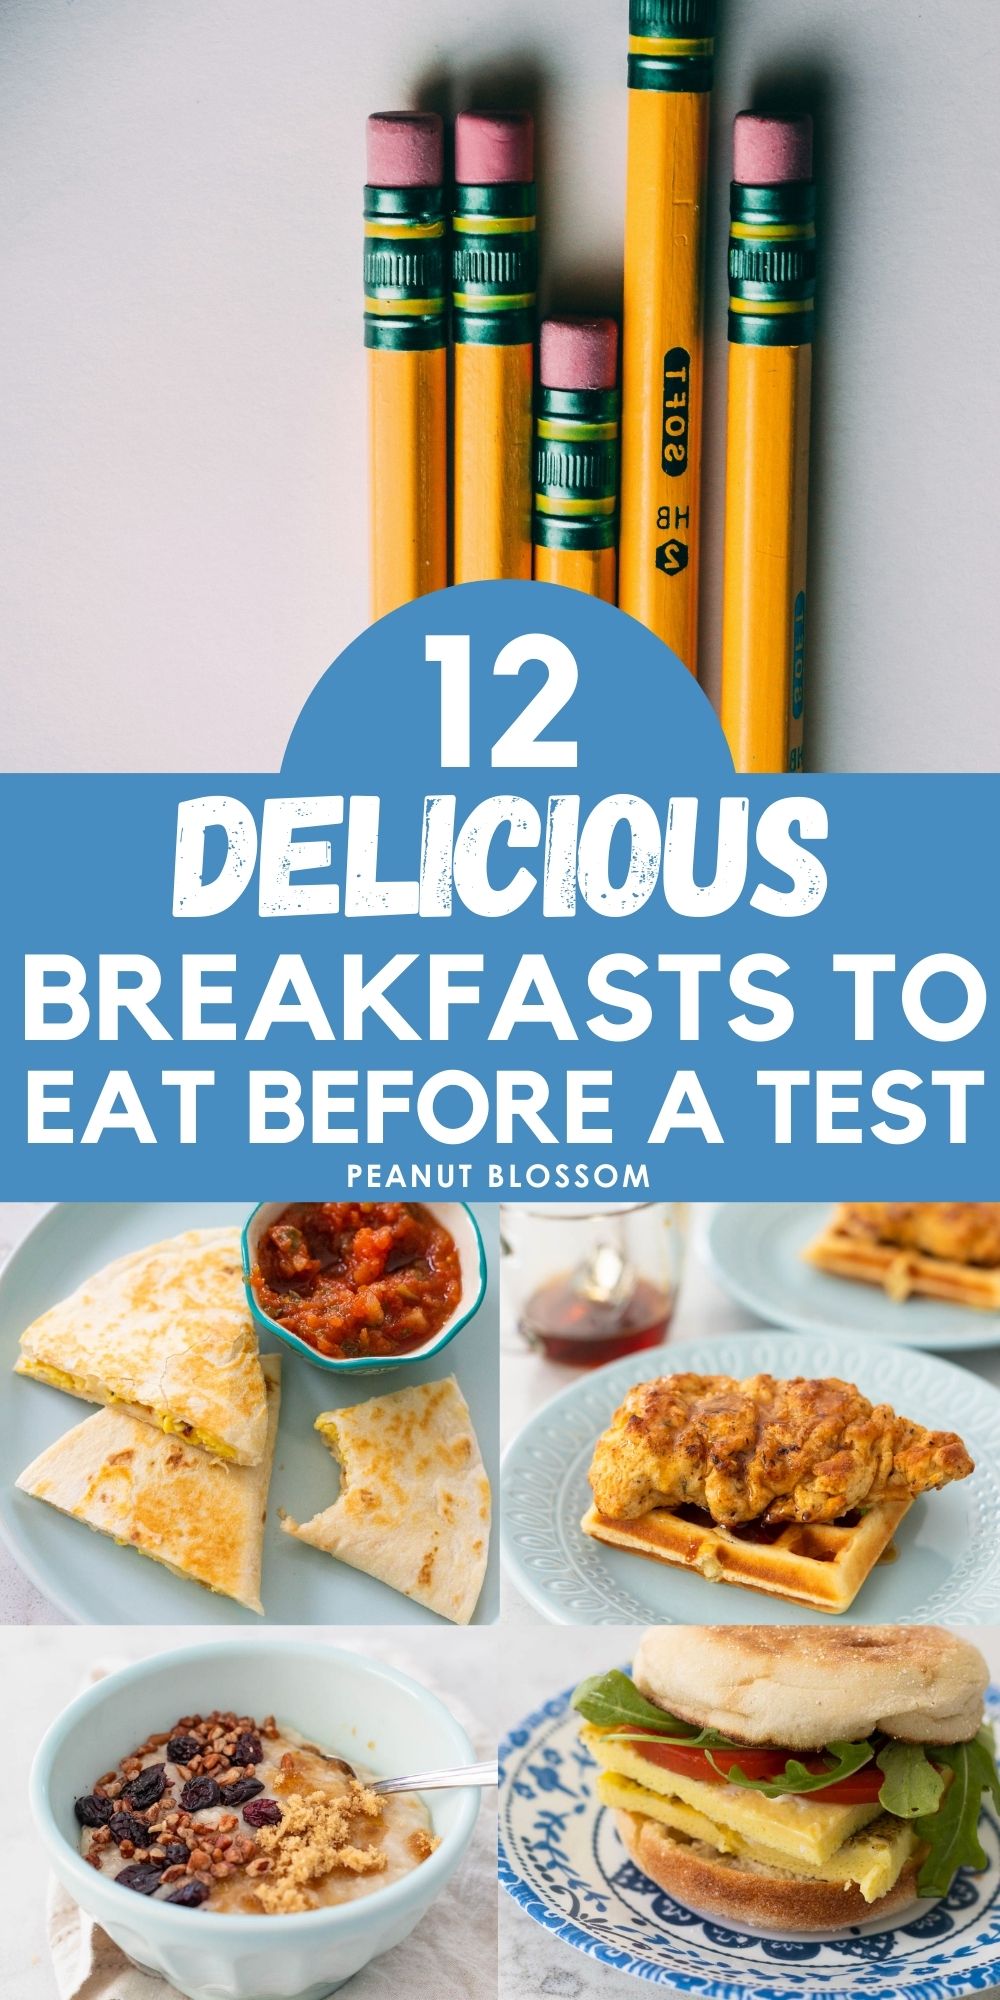 The photo collage shows a stack of #2 pencils next to 4 recipes to eat for breakfast.